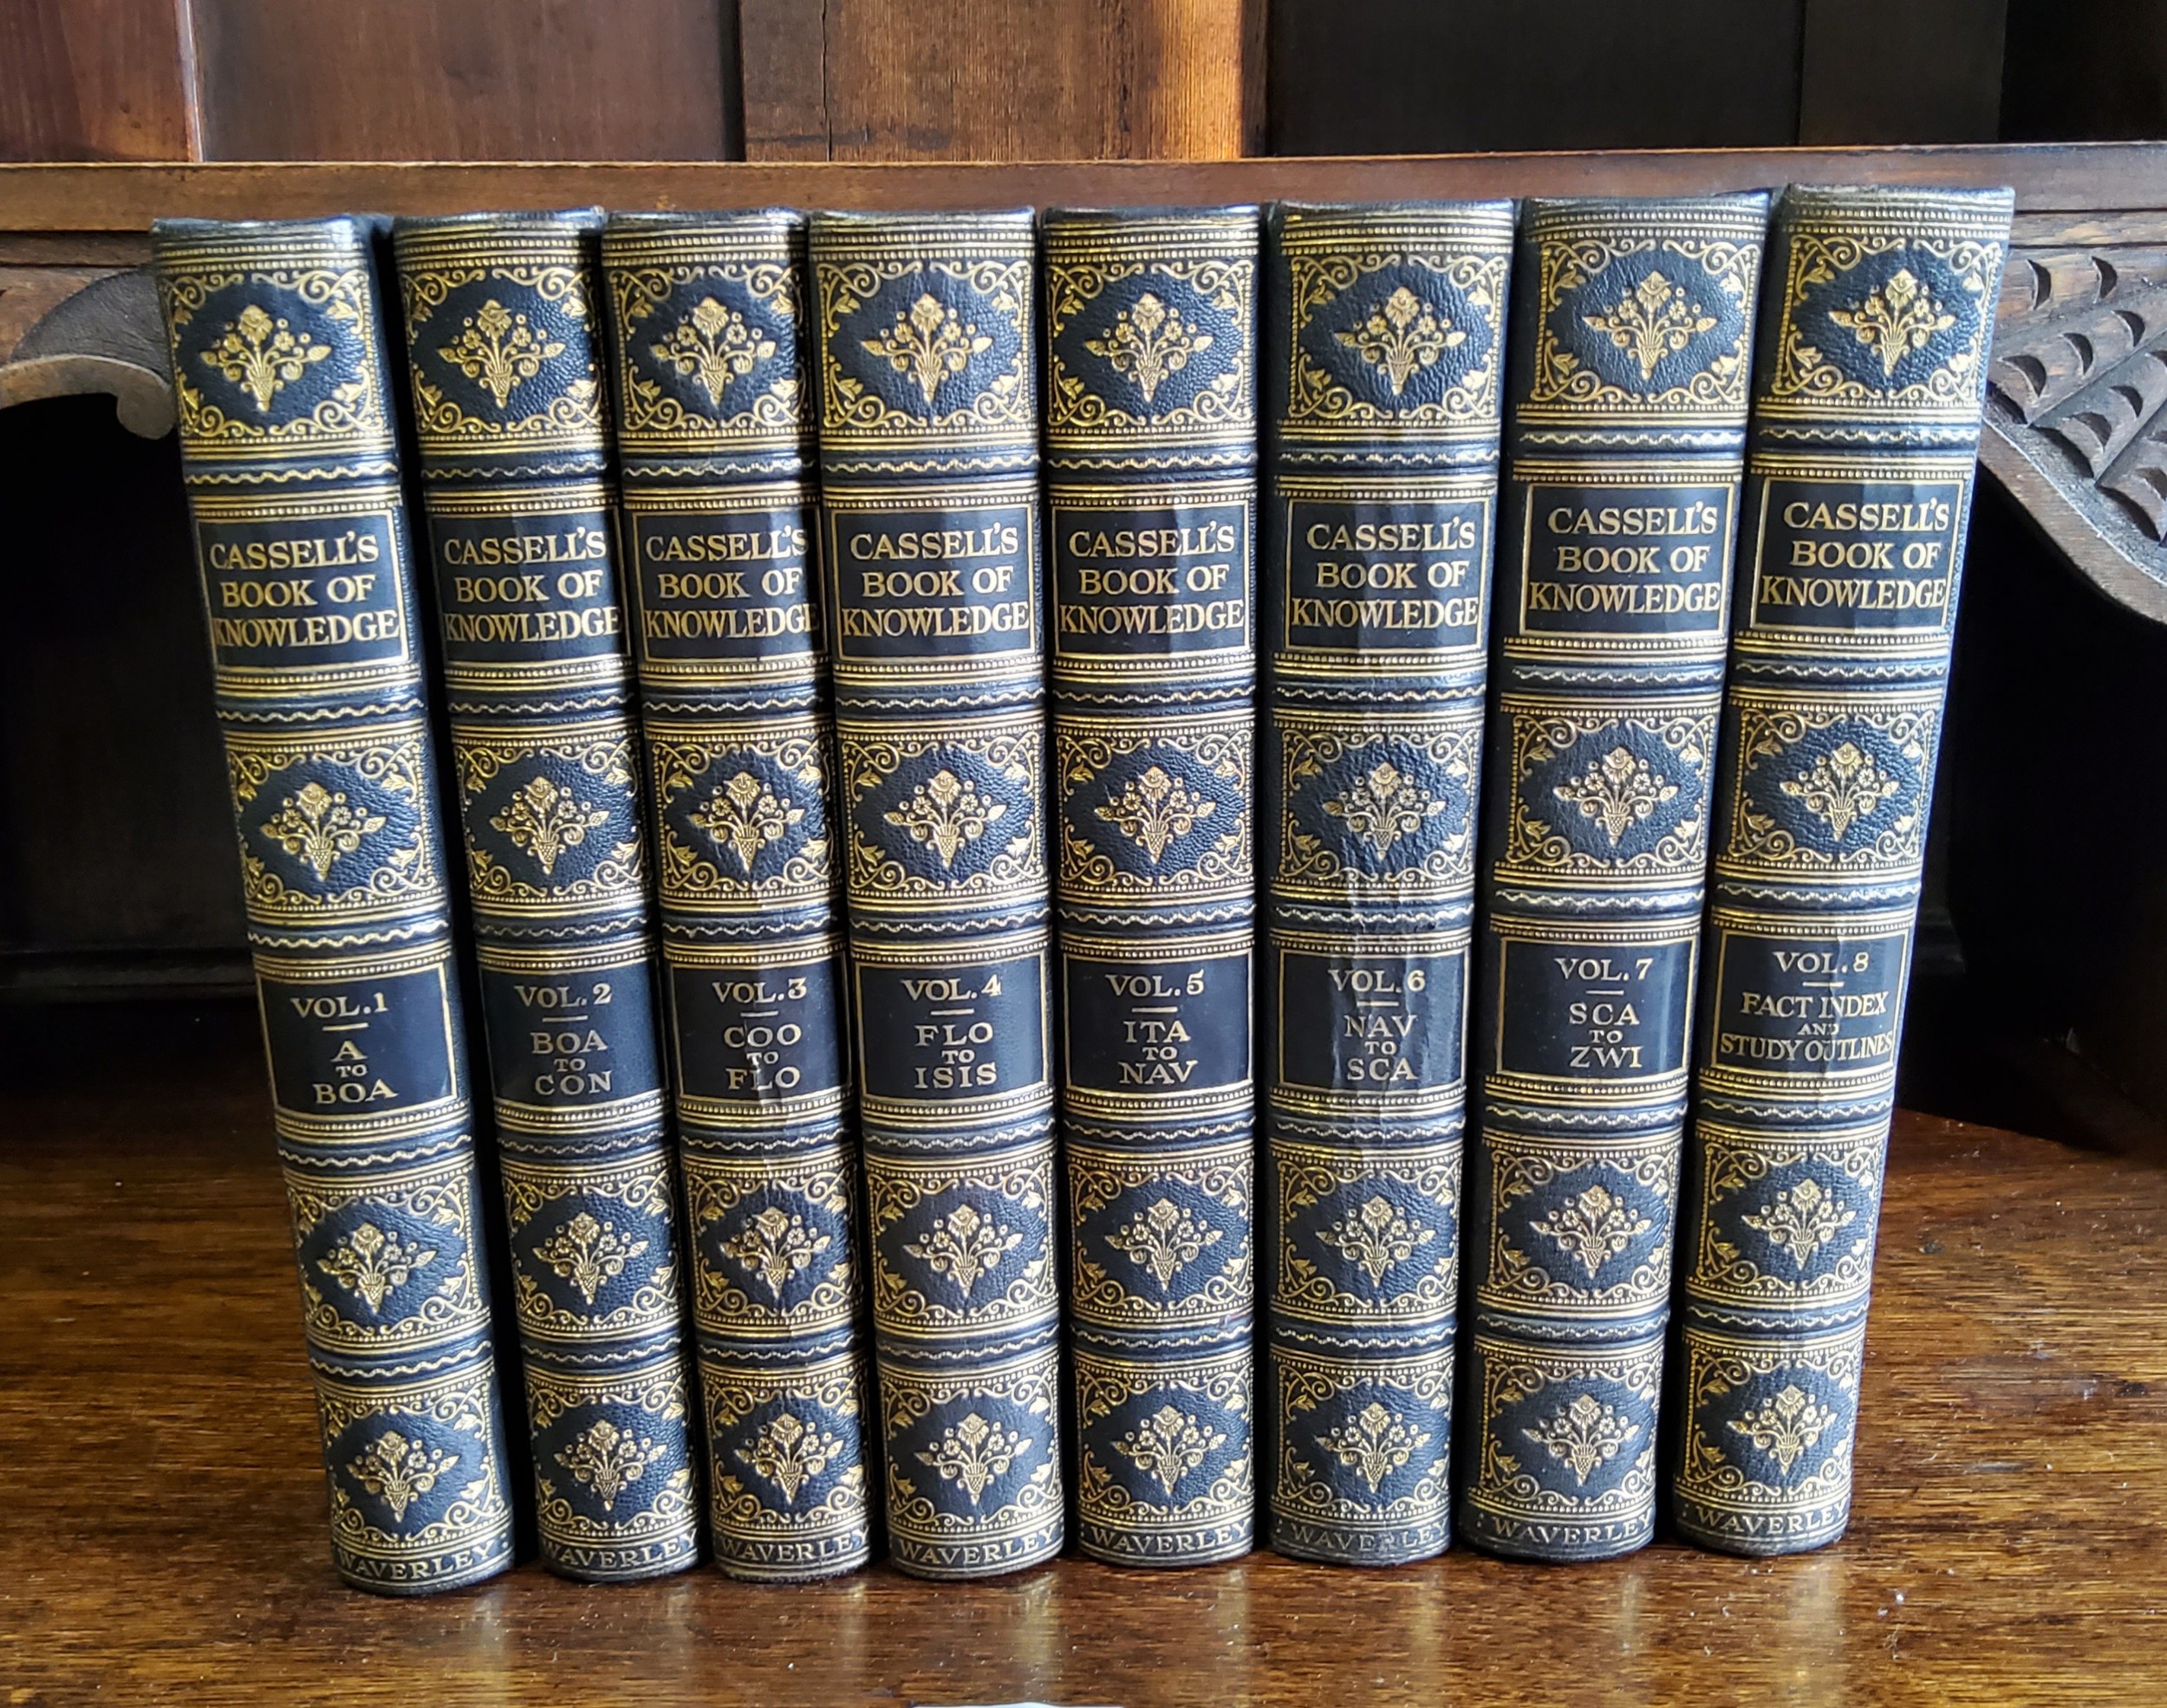 Books - complete set of Cassel's Book of Knowledge Vol.I-VIII, decorative bindings, published by The